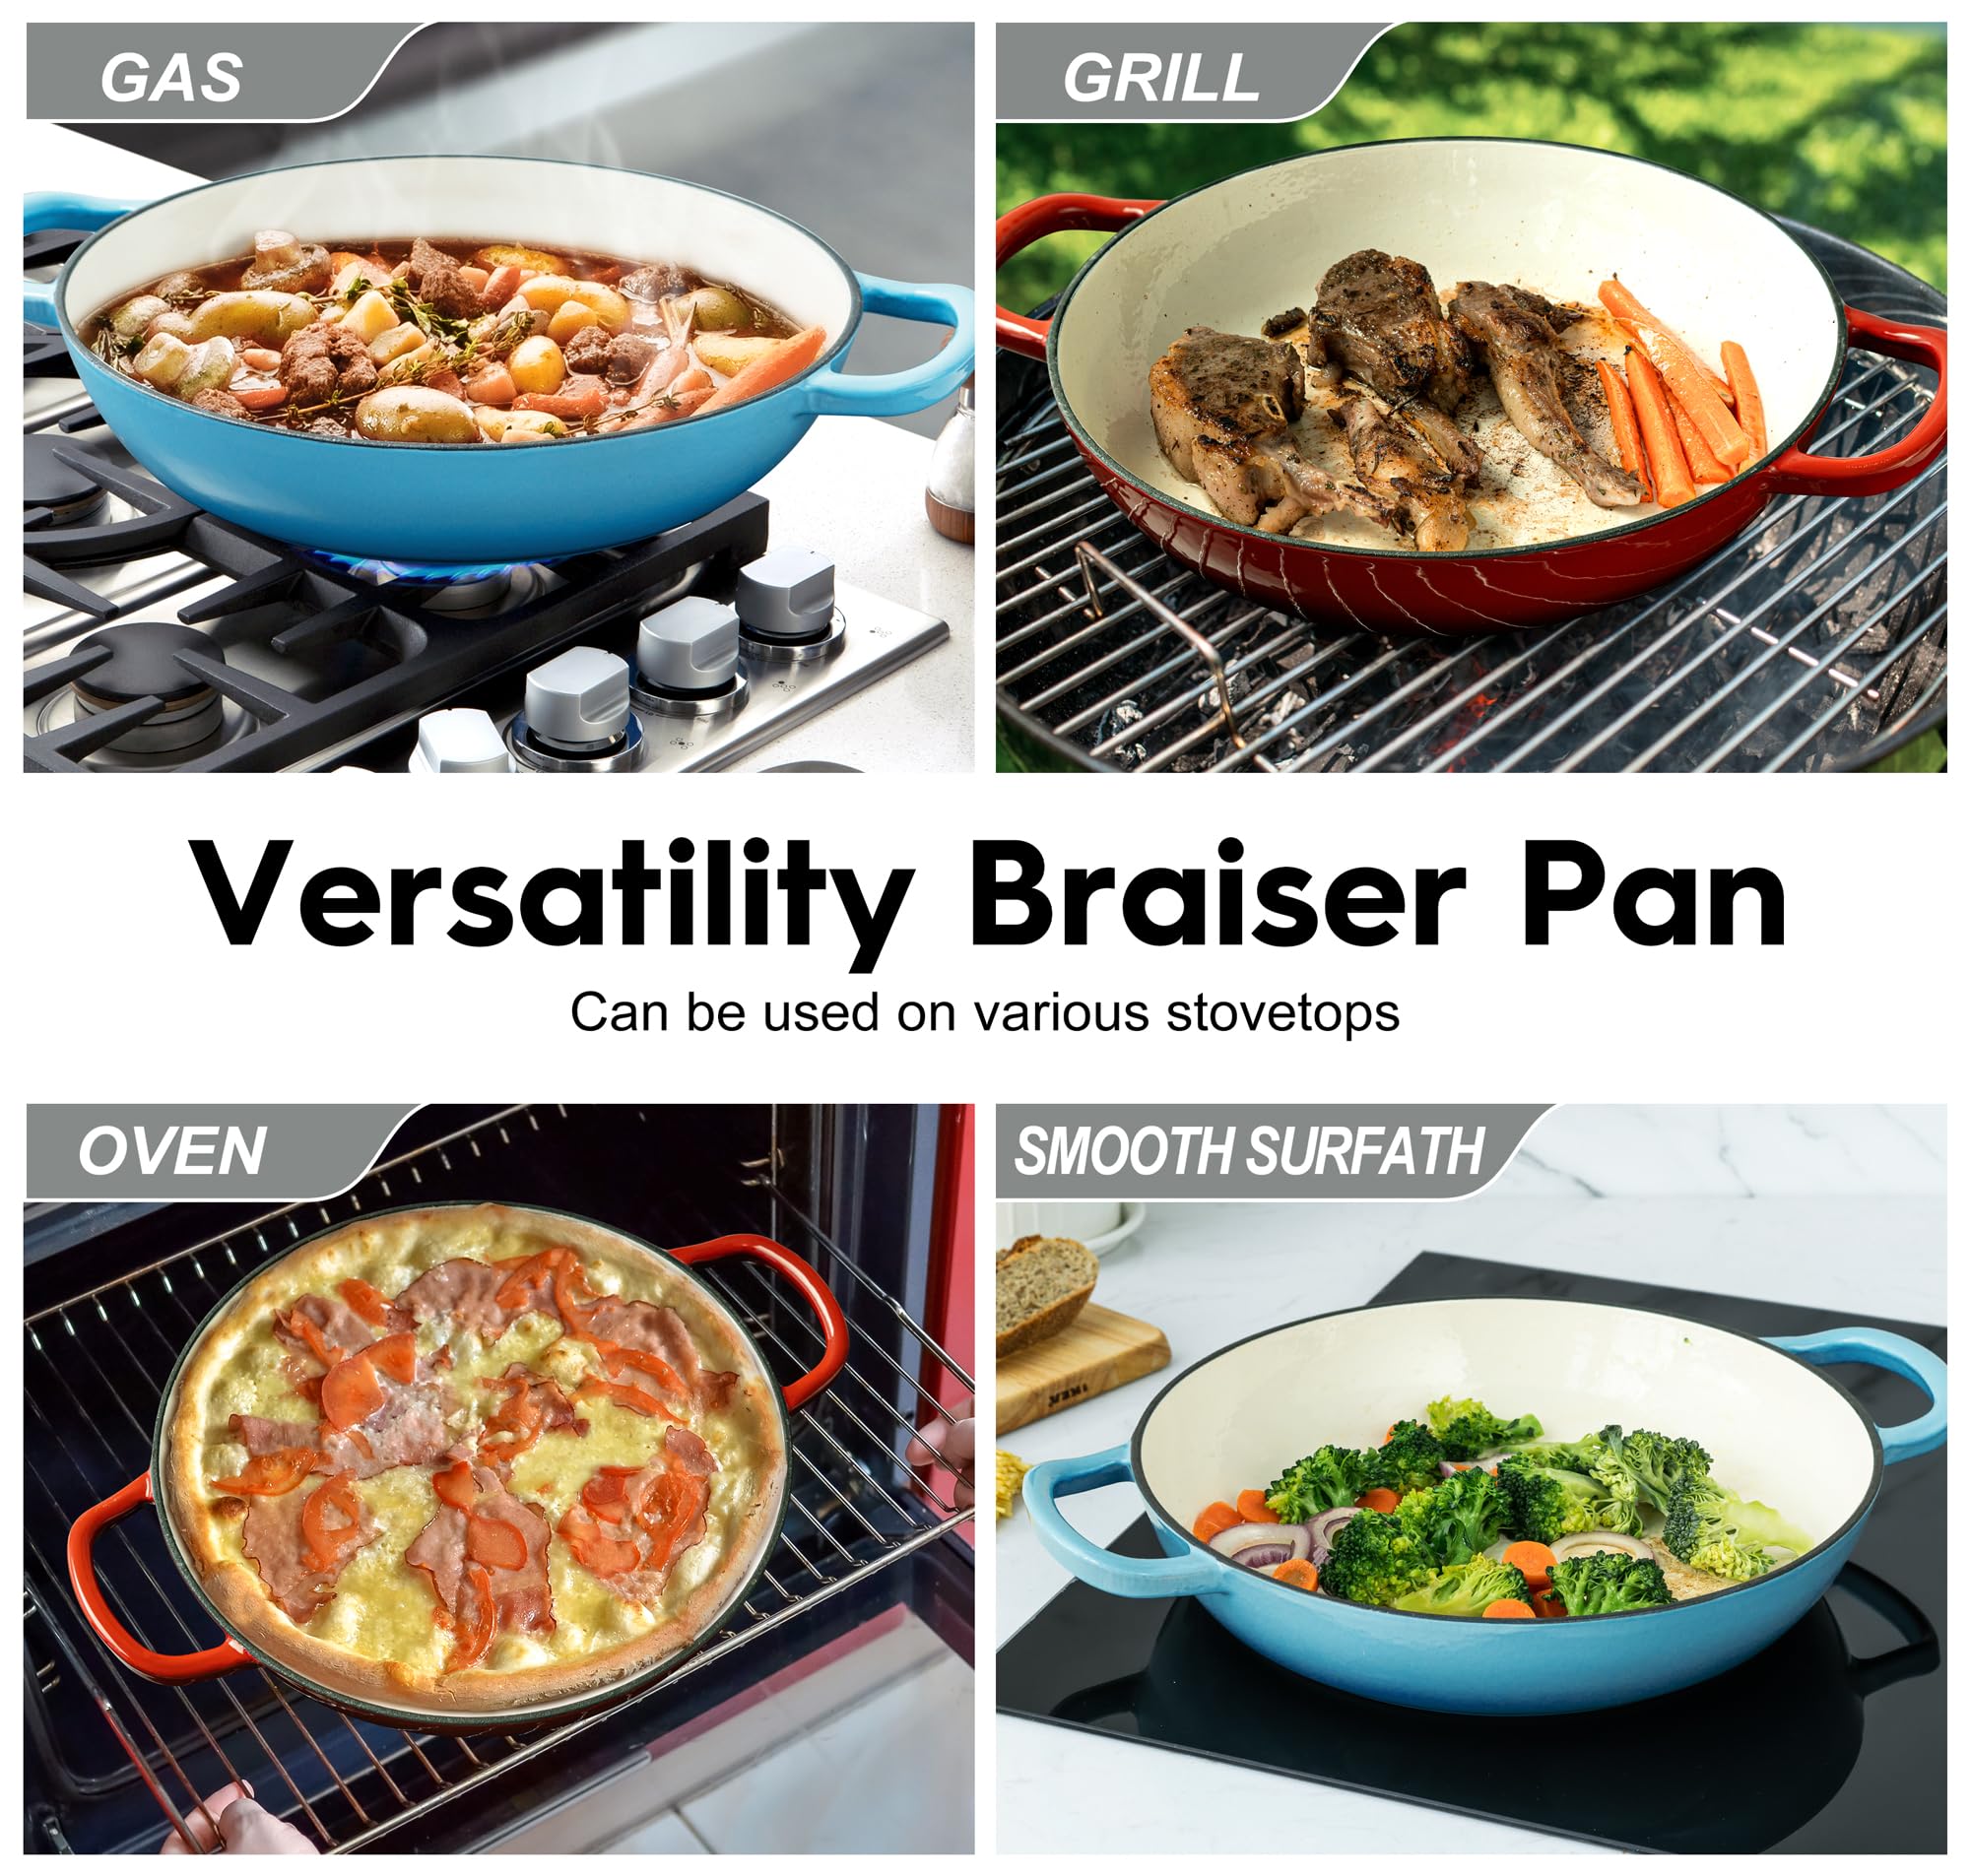 MICHELANGELO Braiser Enameled Cast Iron, 3.5 Quart Braiser Pan with Lid, Nonstick Braiser with Silicone Pads for Heat Insulation, Oven Safe Cast Iron Pan-Cherry Red